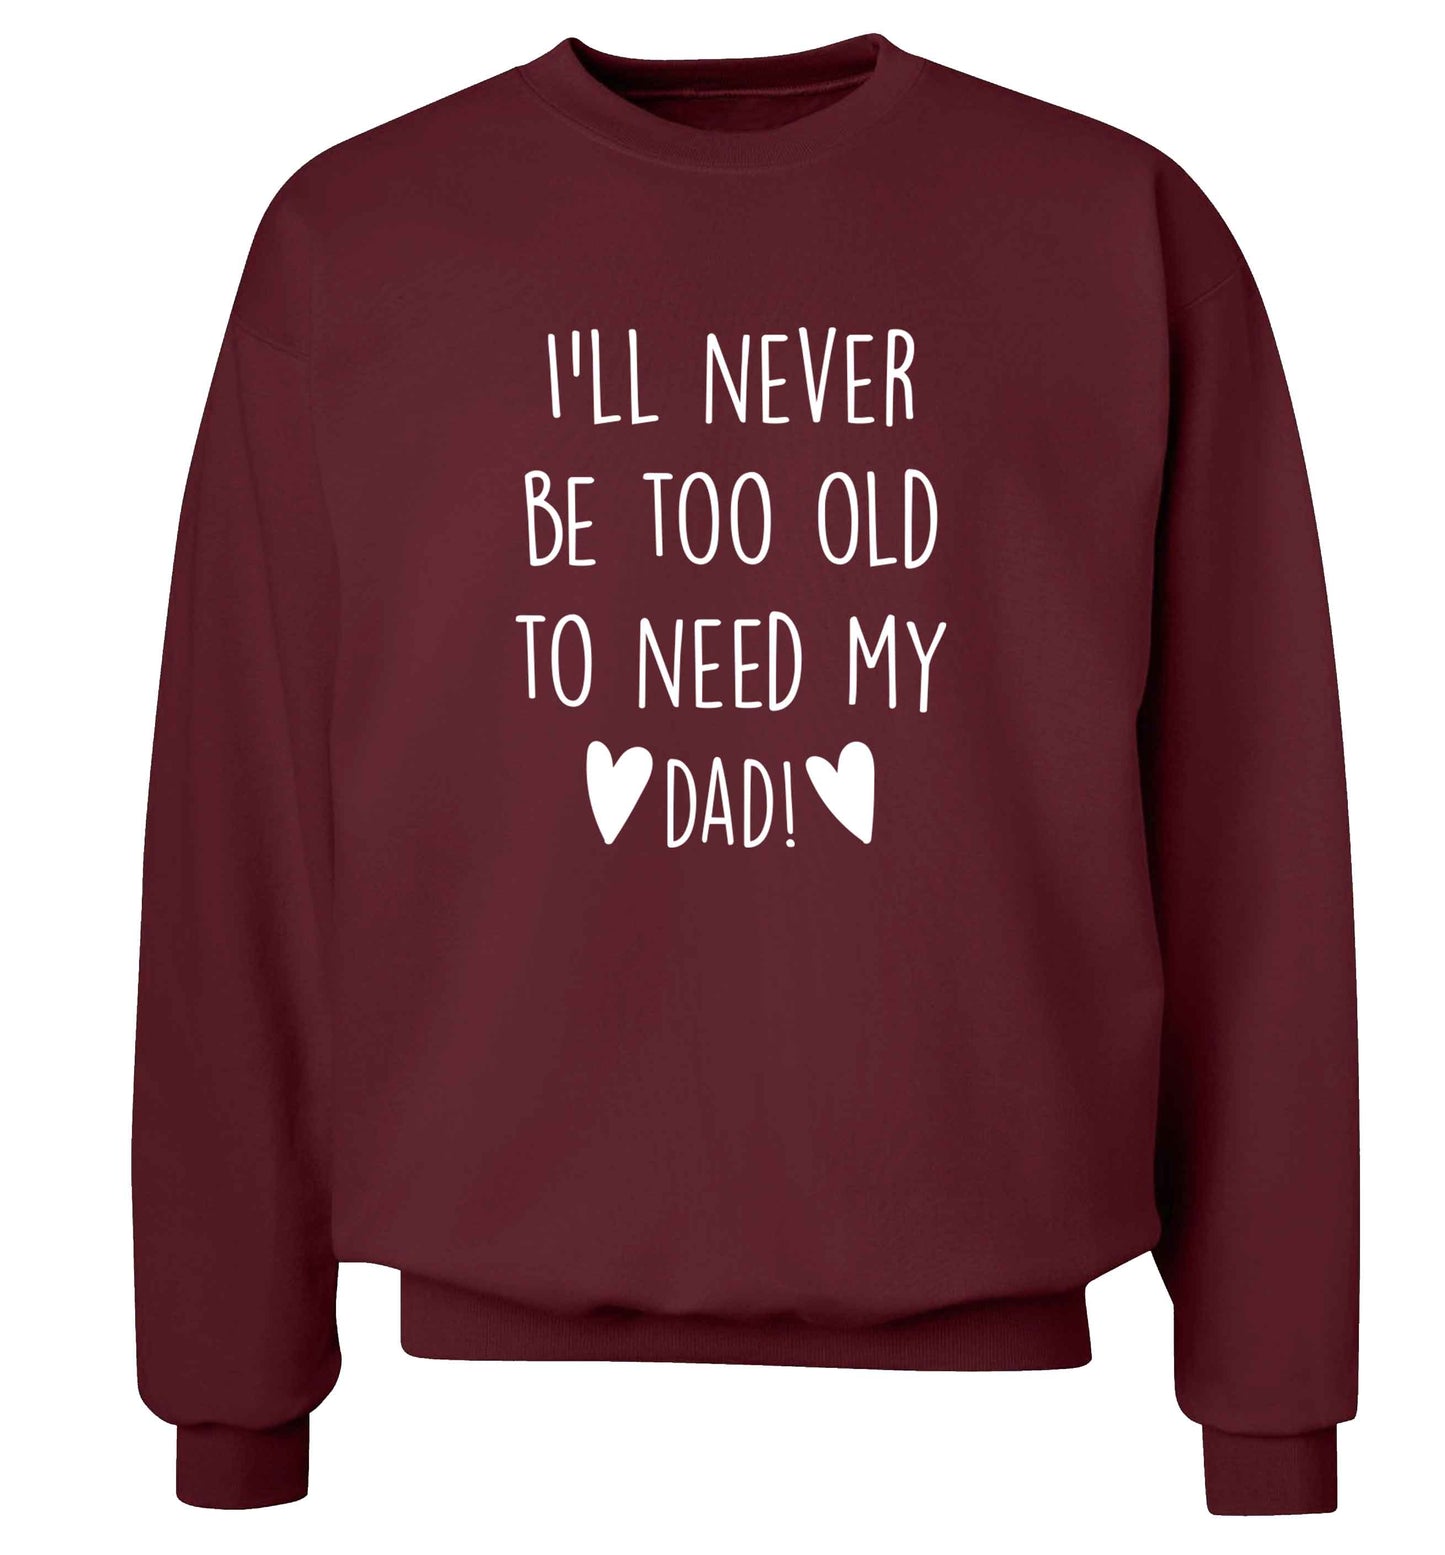 I'll never be too old to need my dad adult's unisex maroon sweater 2XL